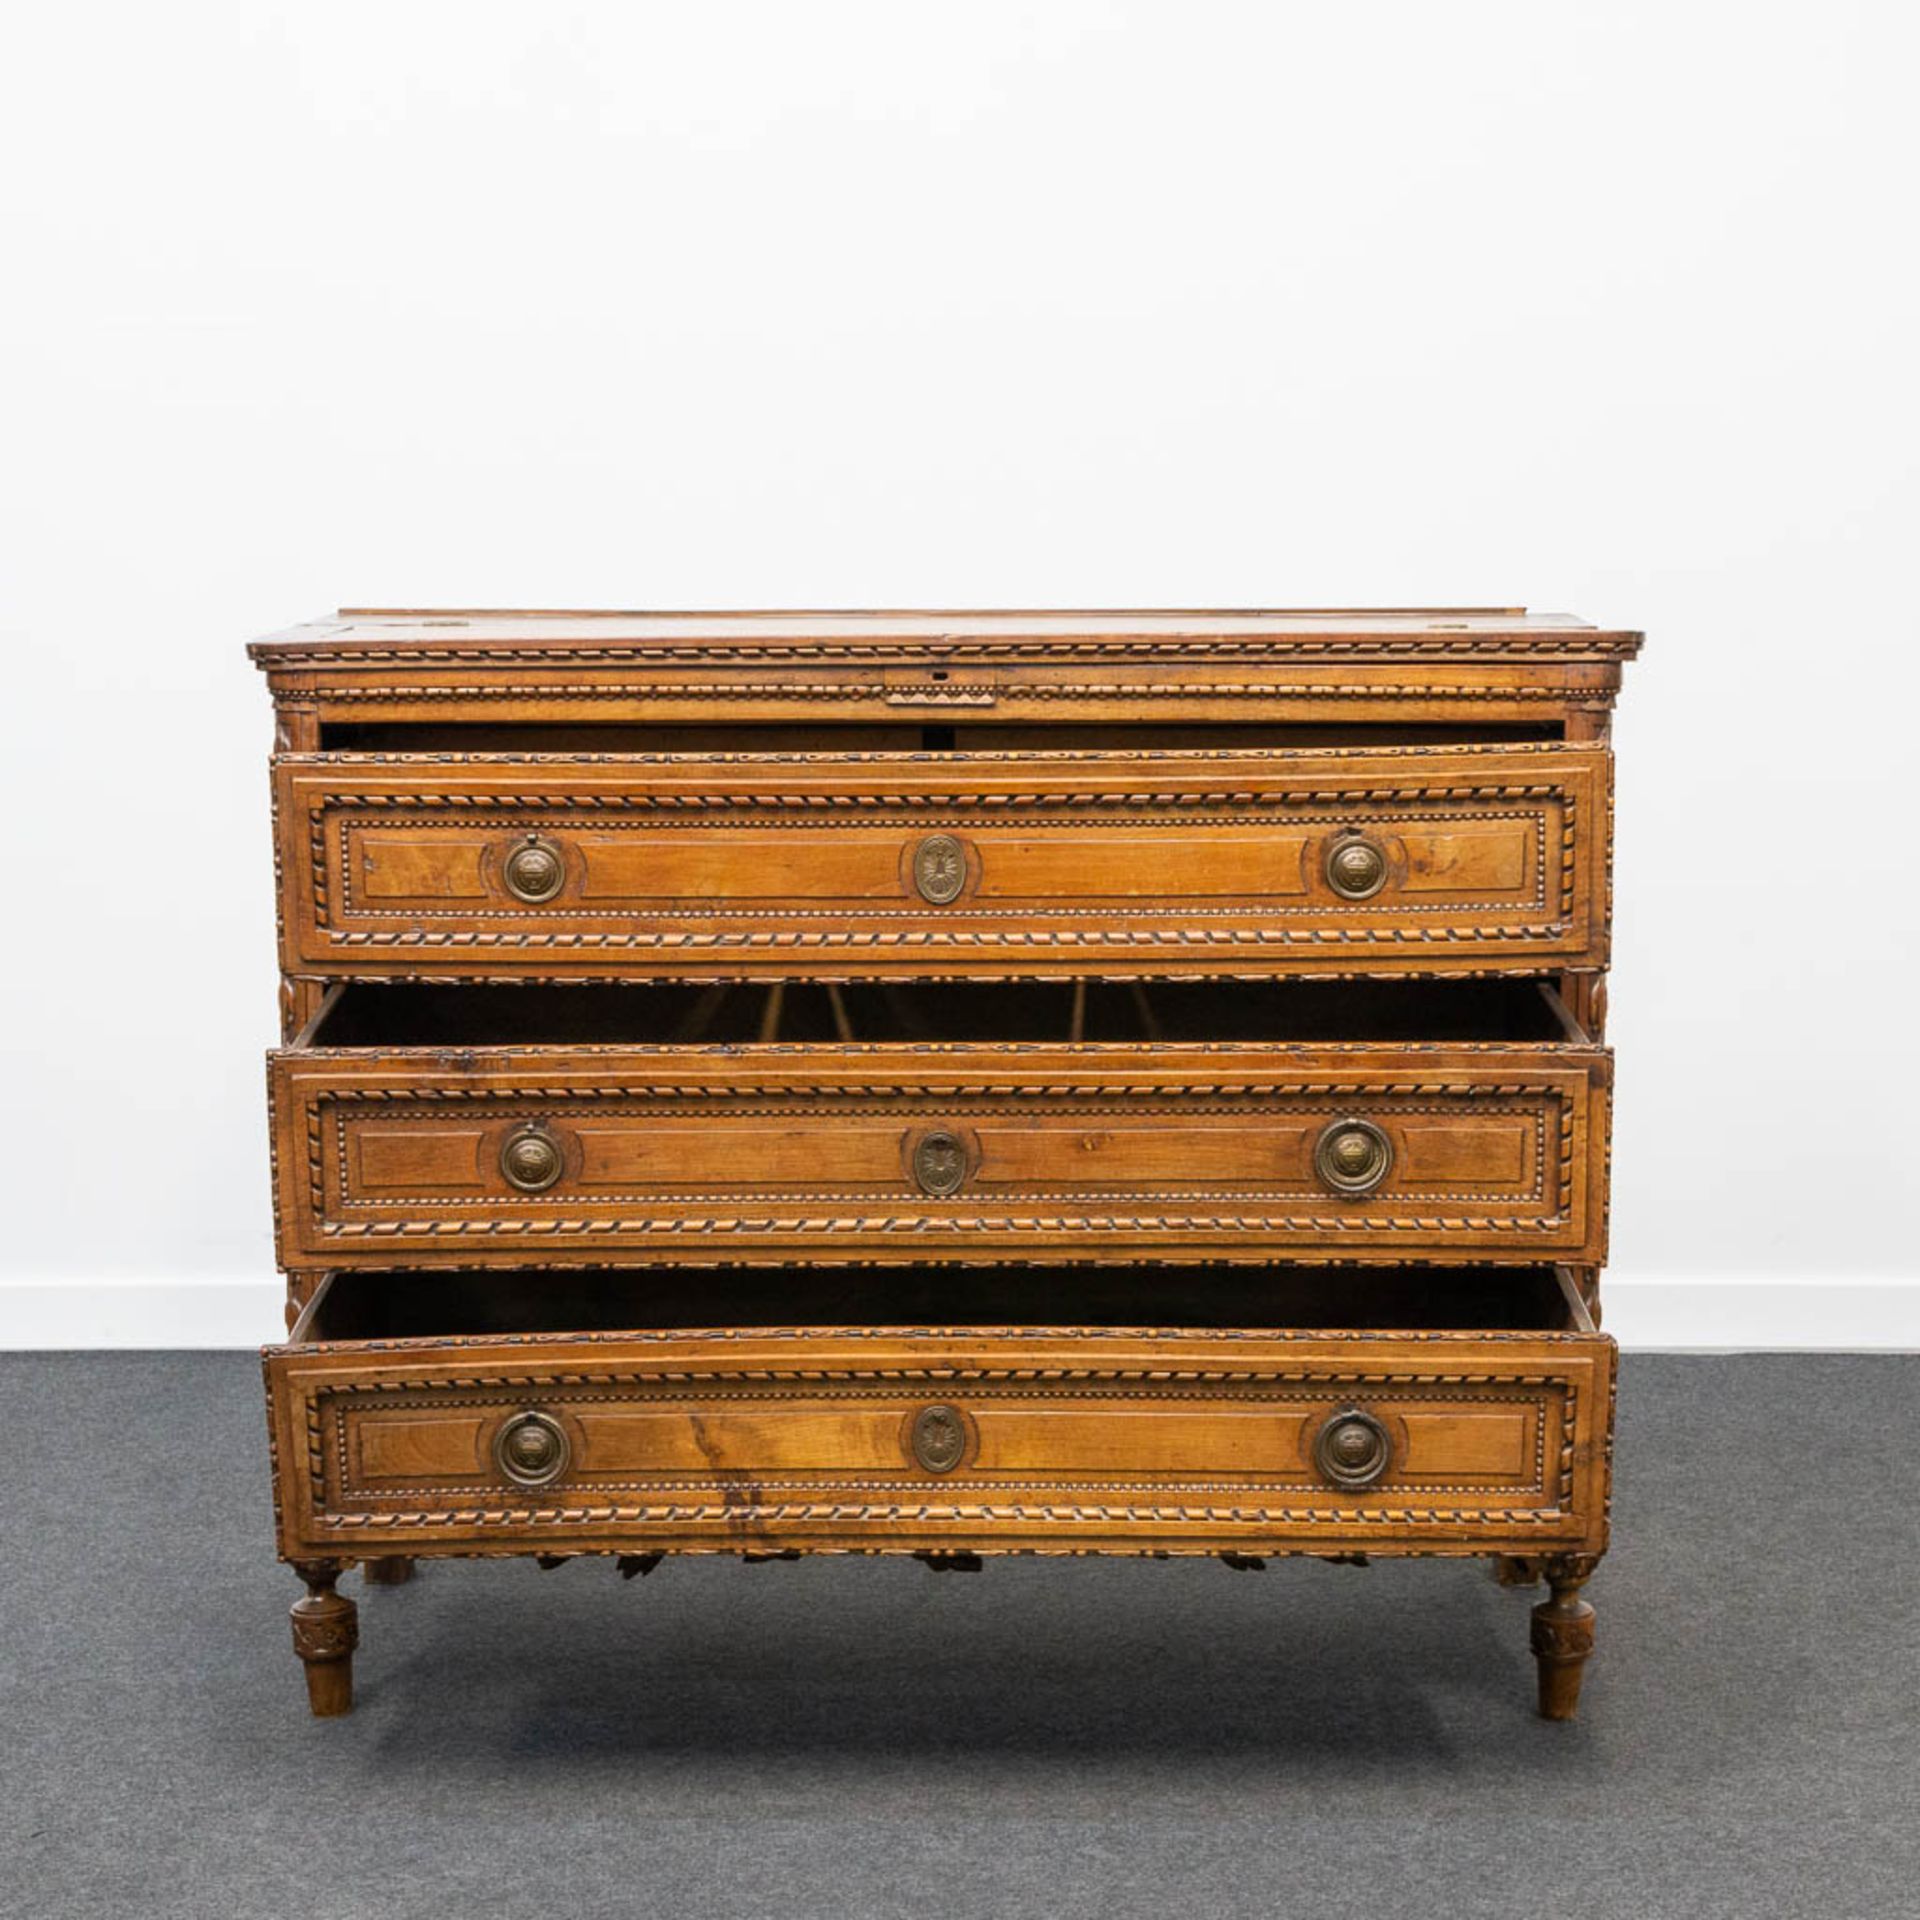 A wood sculptured commode in Louis XVI style, with 3 drawers and a hidden desk. 18th century. - Image 2 of 23